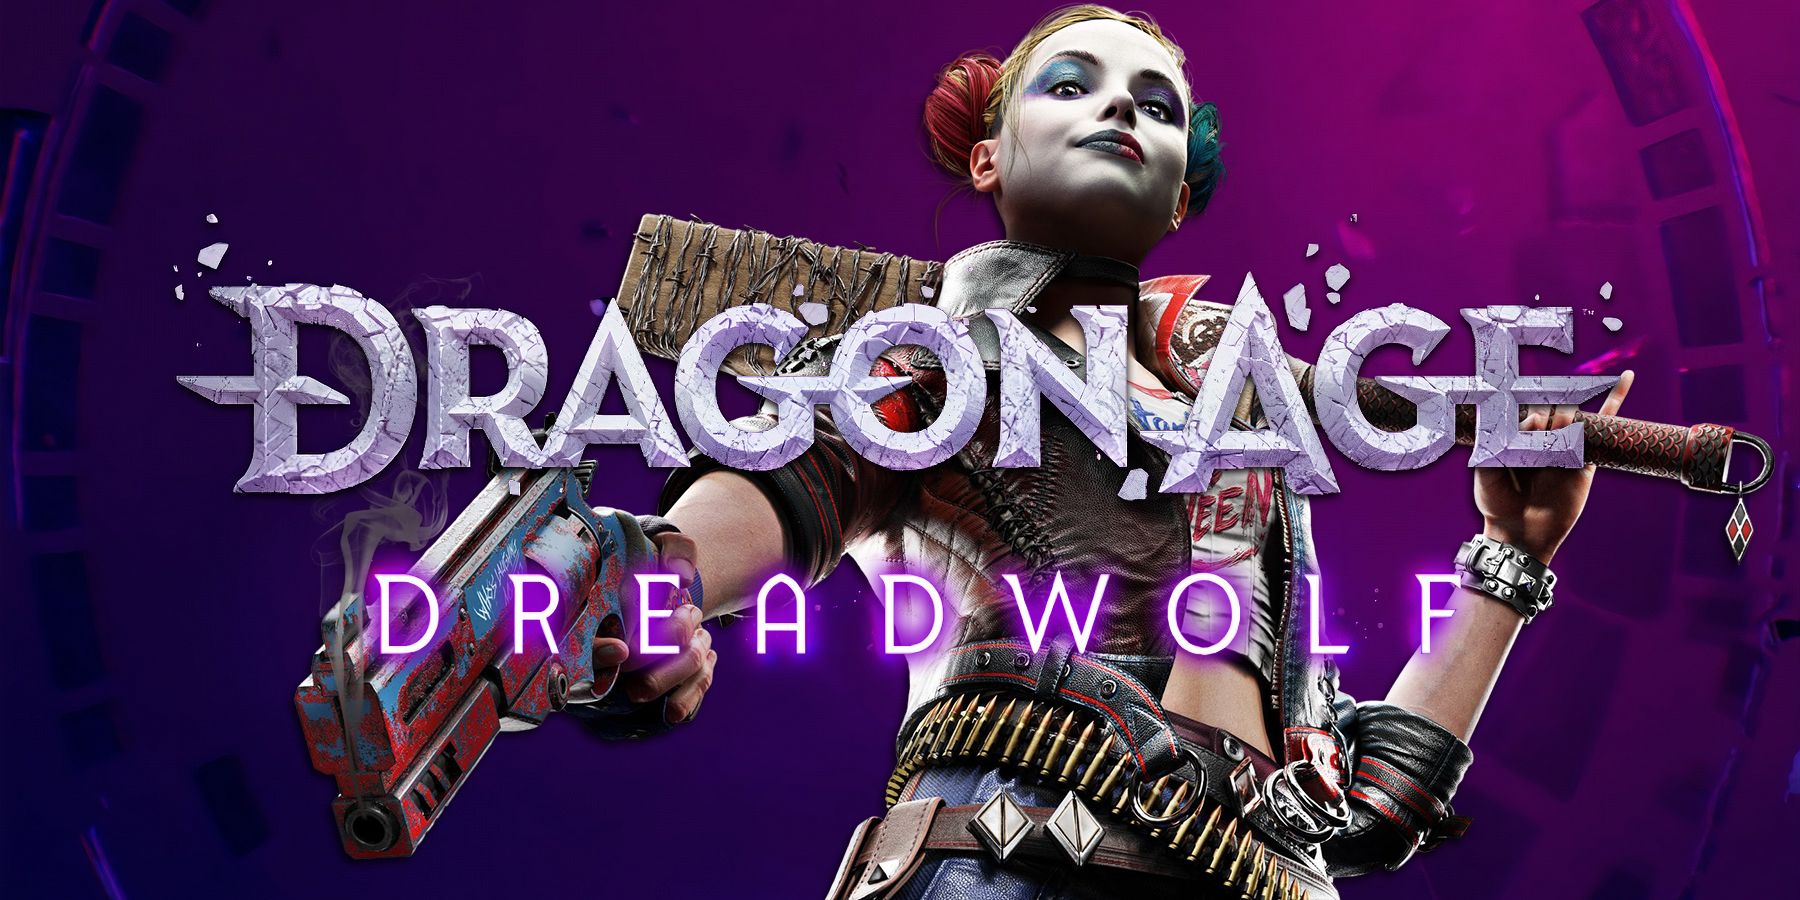 Dragon Age Dreadwolf logo with Harley Quinn from Suicide Squad Kill the Justice League